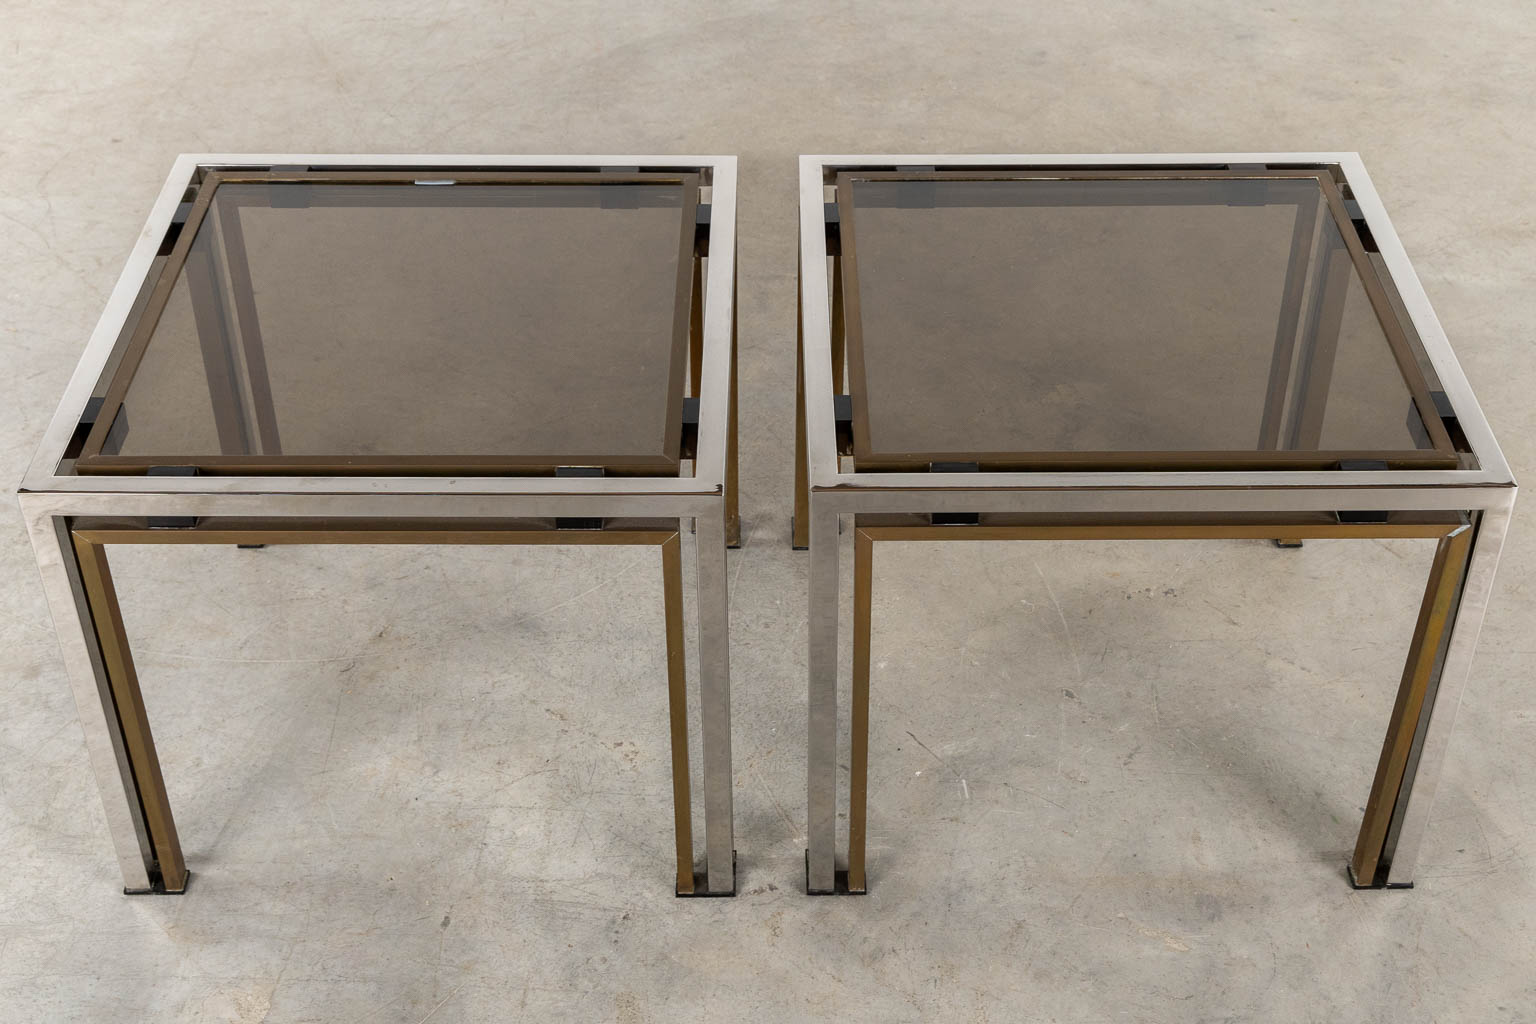 Four identical tables, brass and glass. Dewulf Selection / Belgo Chrome. (L:60 x W:60 x H:50 cm)